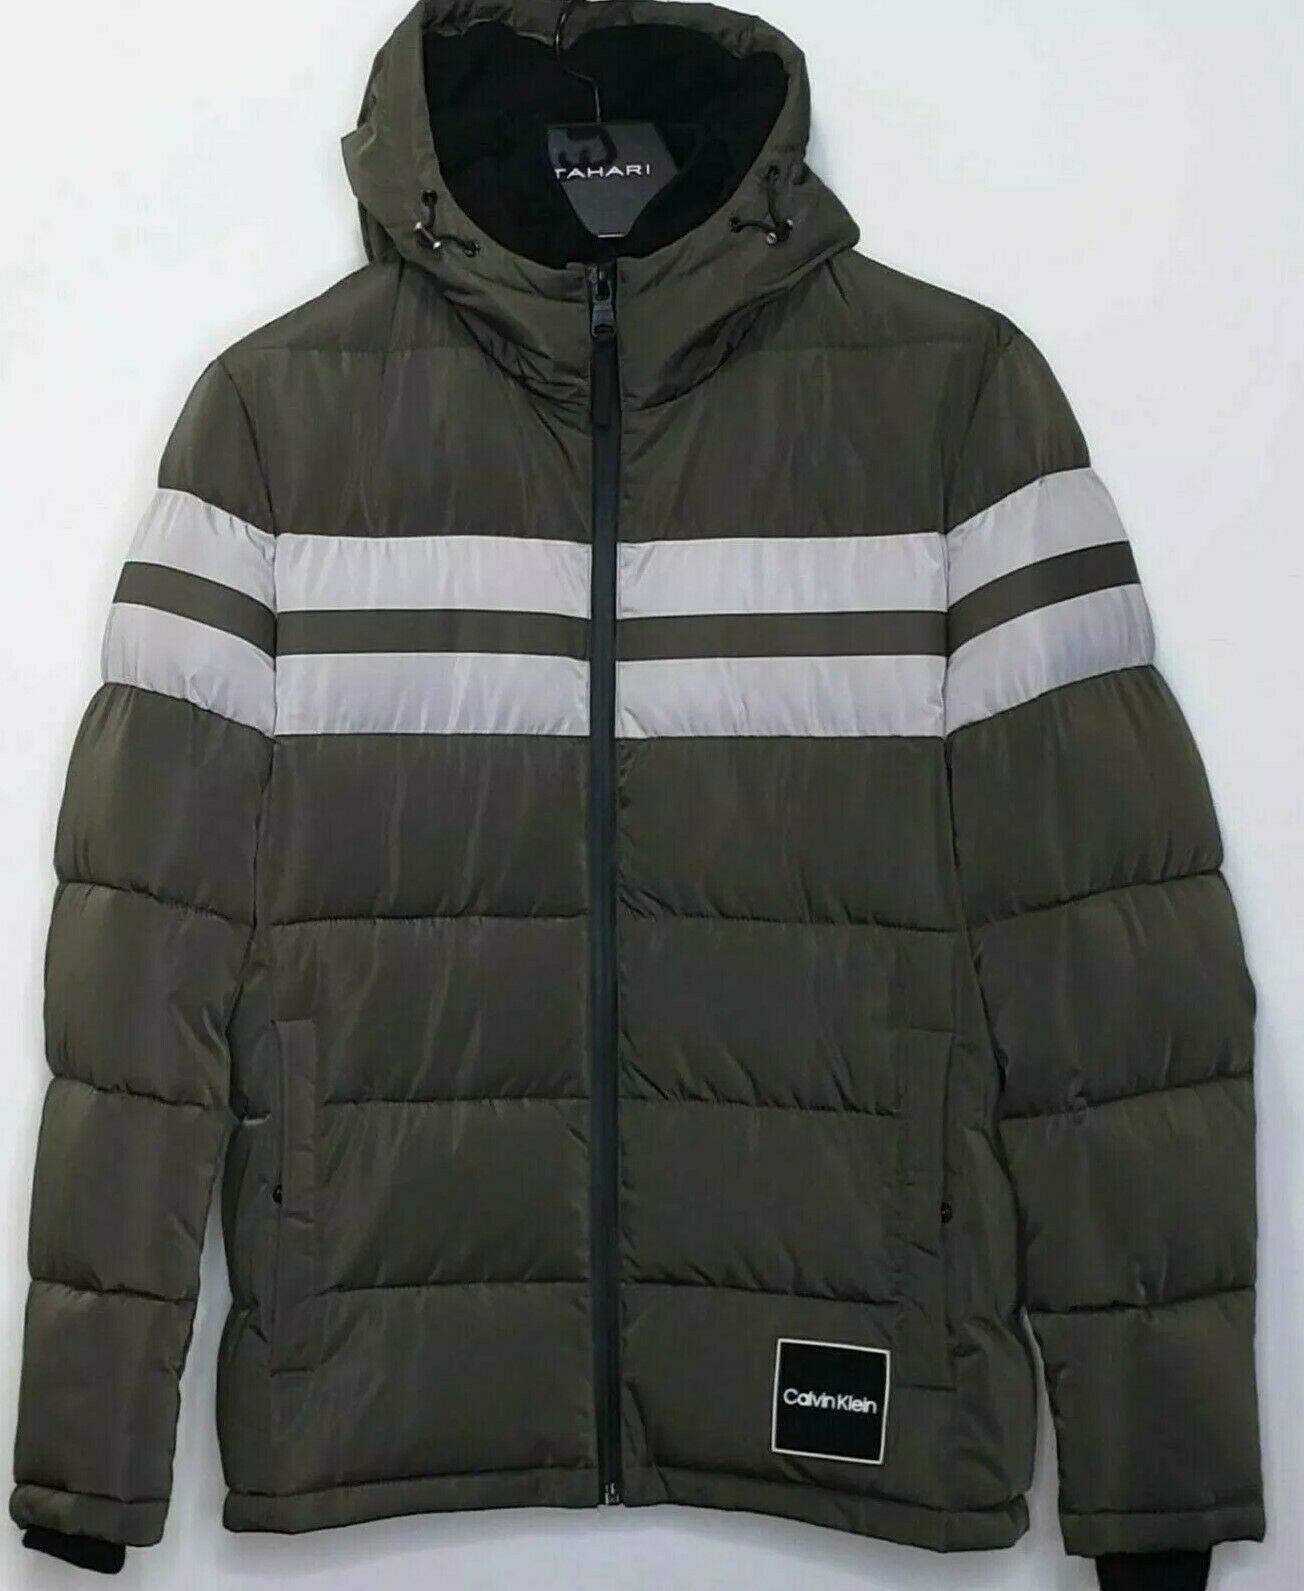 Calvin Klein Mens Water Resistant Green Hooded Puffer Winter Jacket  Size M - SVNYFancy